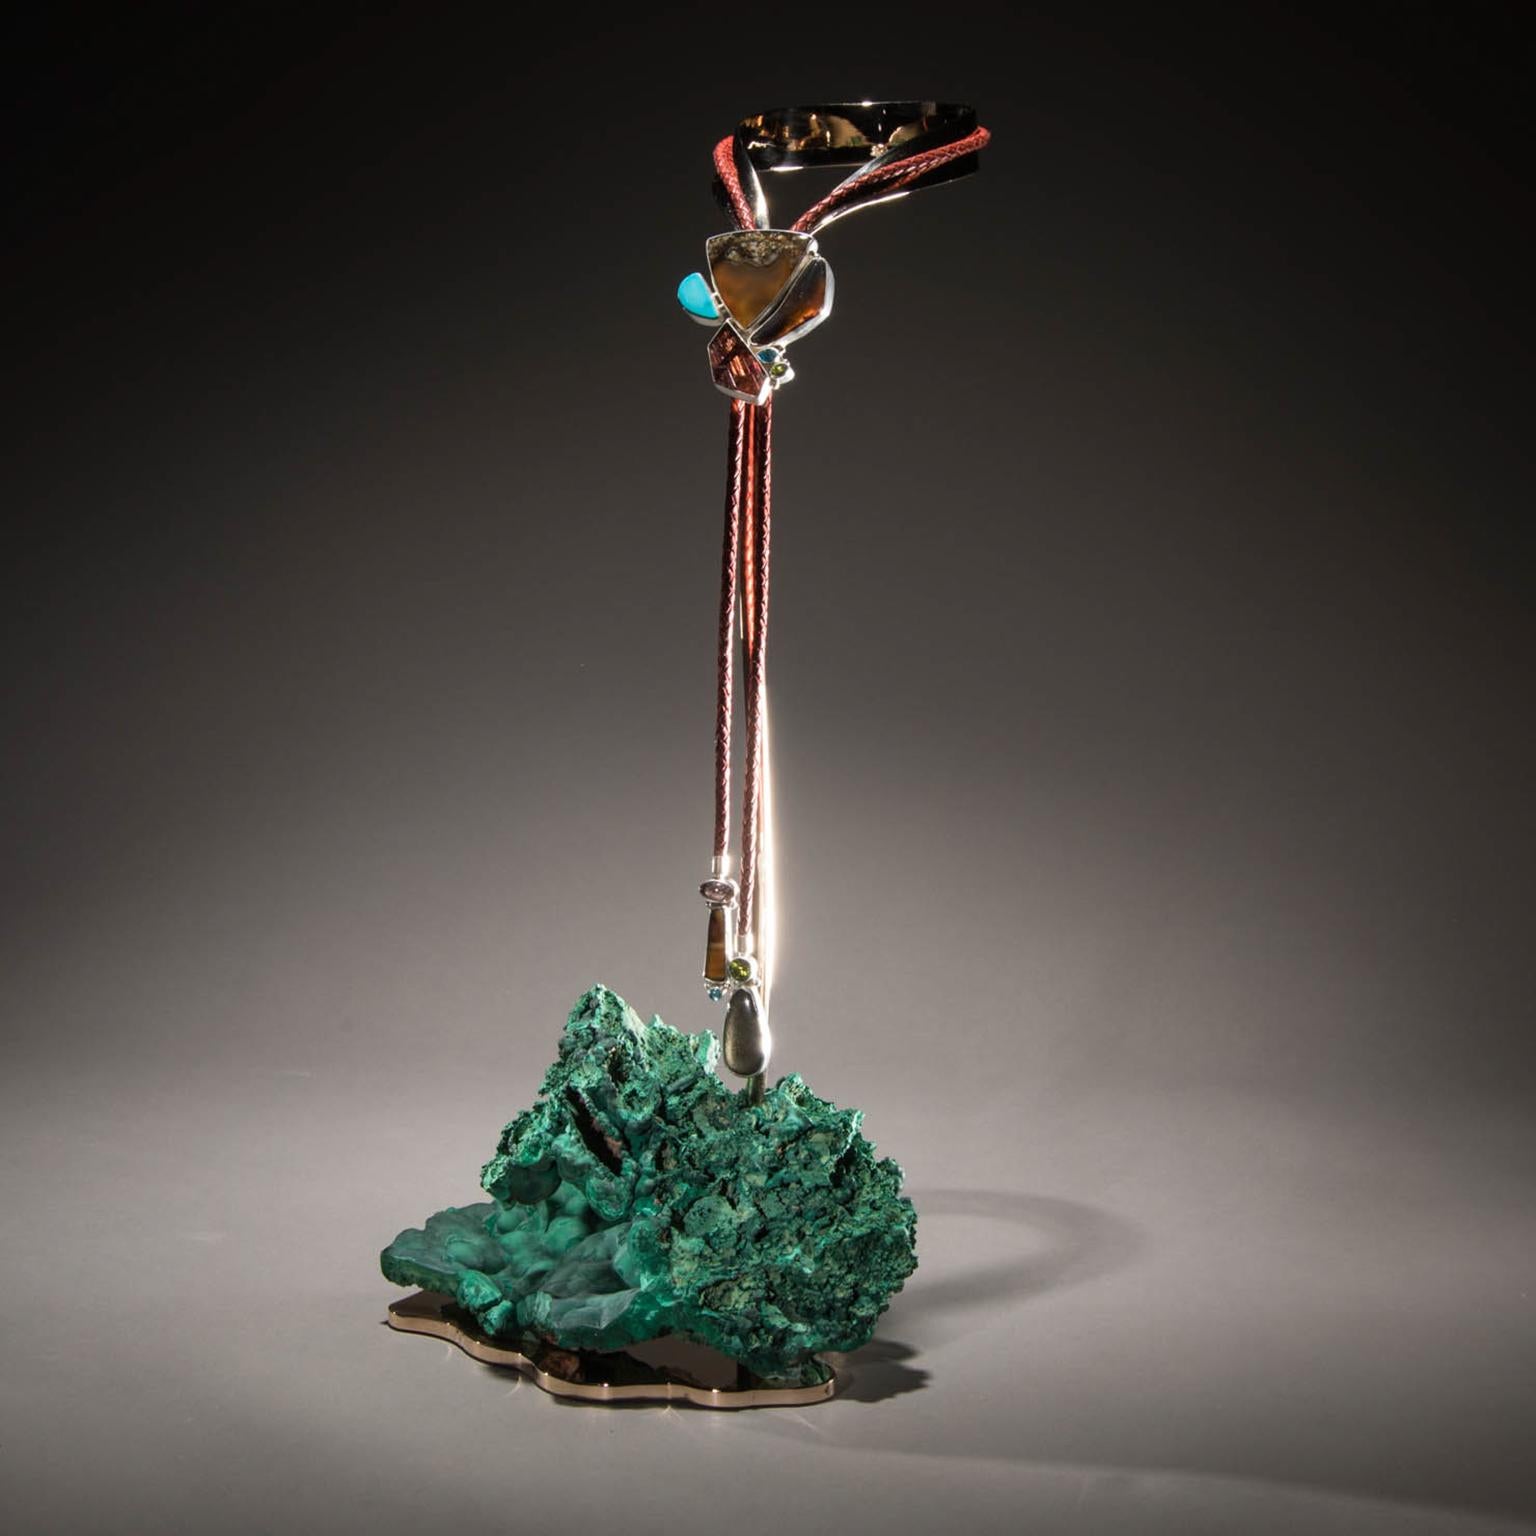 Montana Agate Bolo Tie On Malachite.

The most essential elements of life wind through Studio Greytak’s Montana Agate Bolo Tie on Malachite.  A lariat necklace featuring a polished triangle of earthy agate lies between the pristine blue of watery